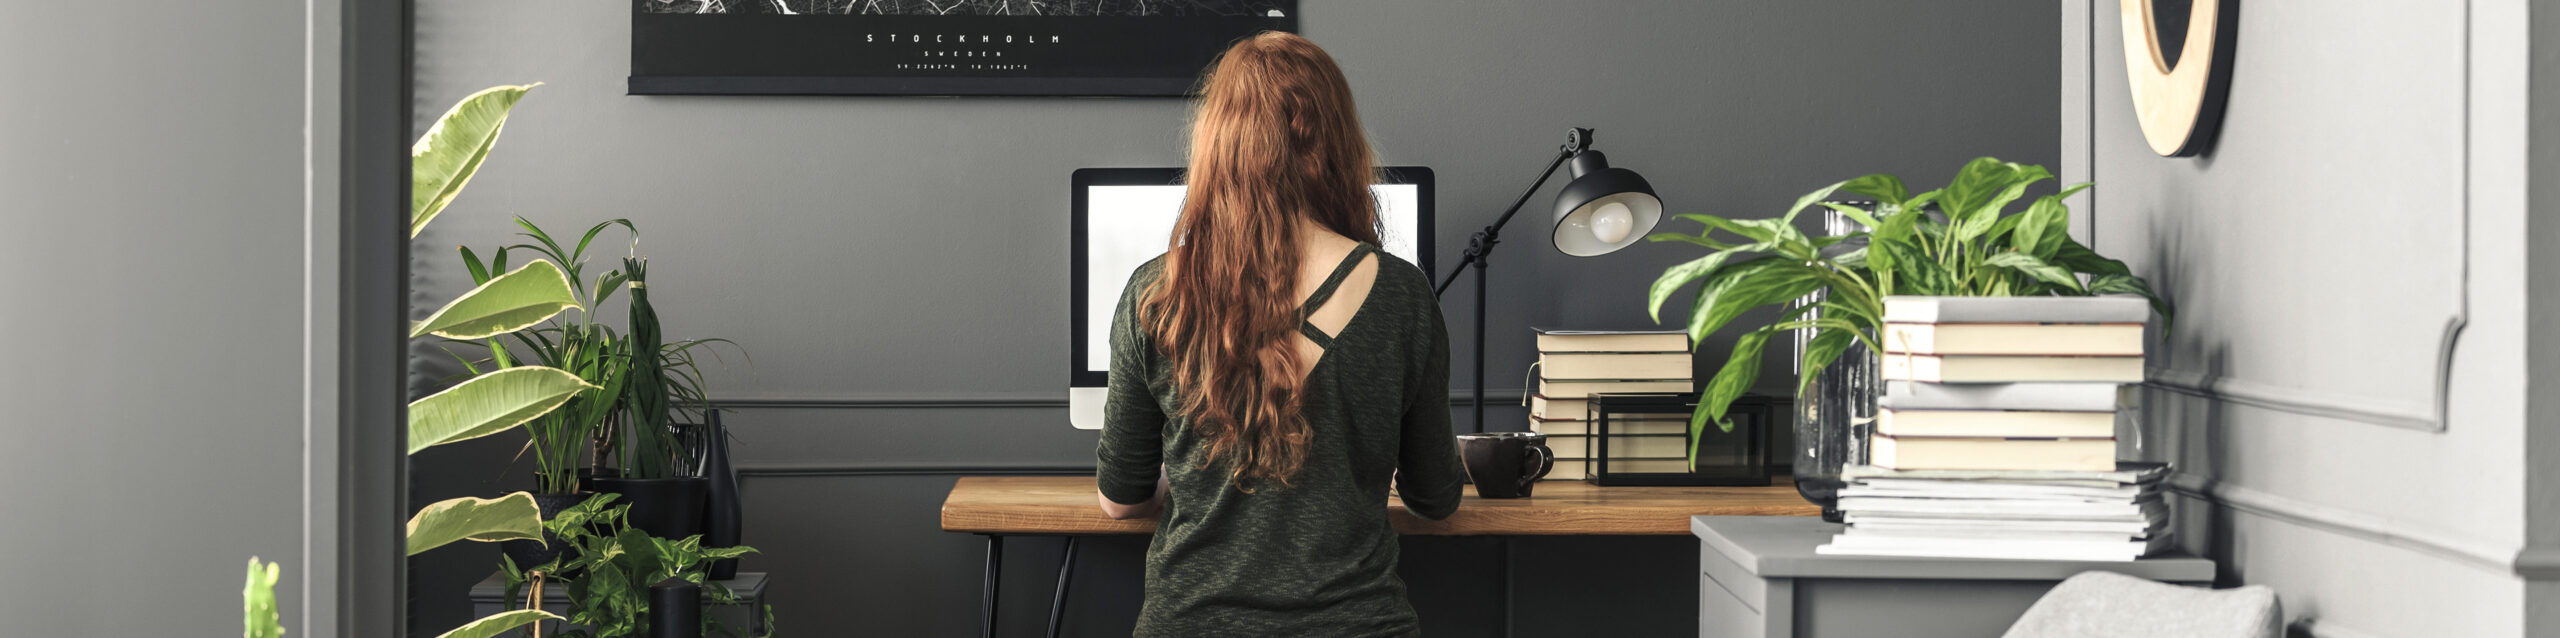 woman writing on a desktop computer sitting at a desk